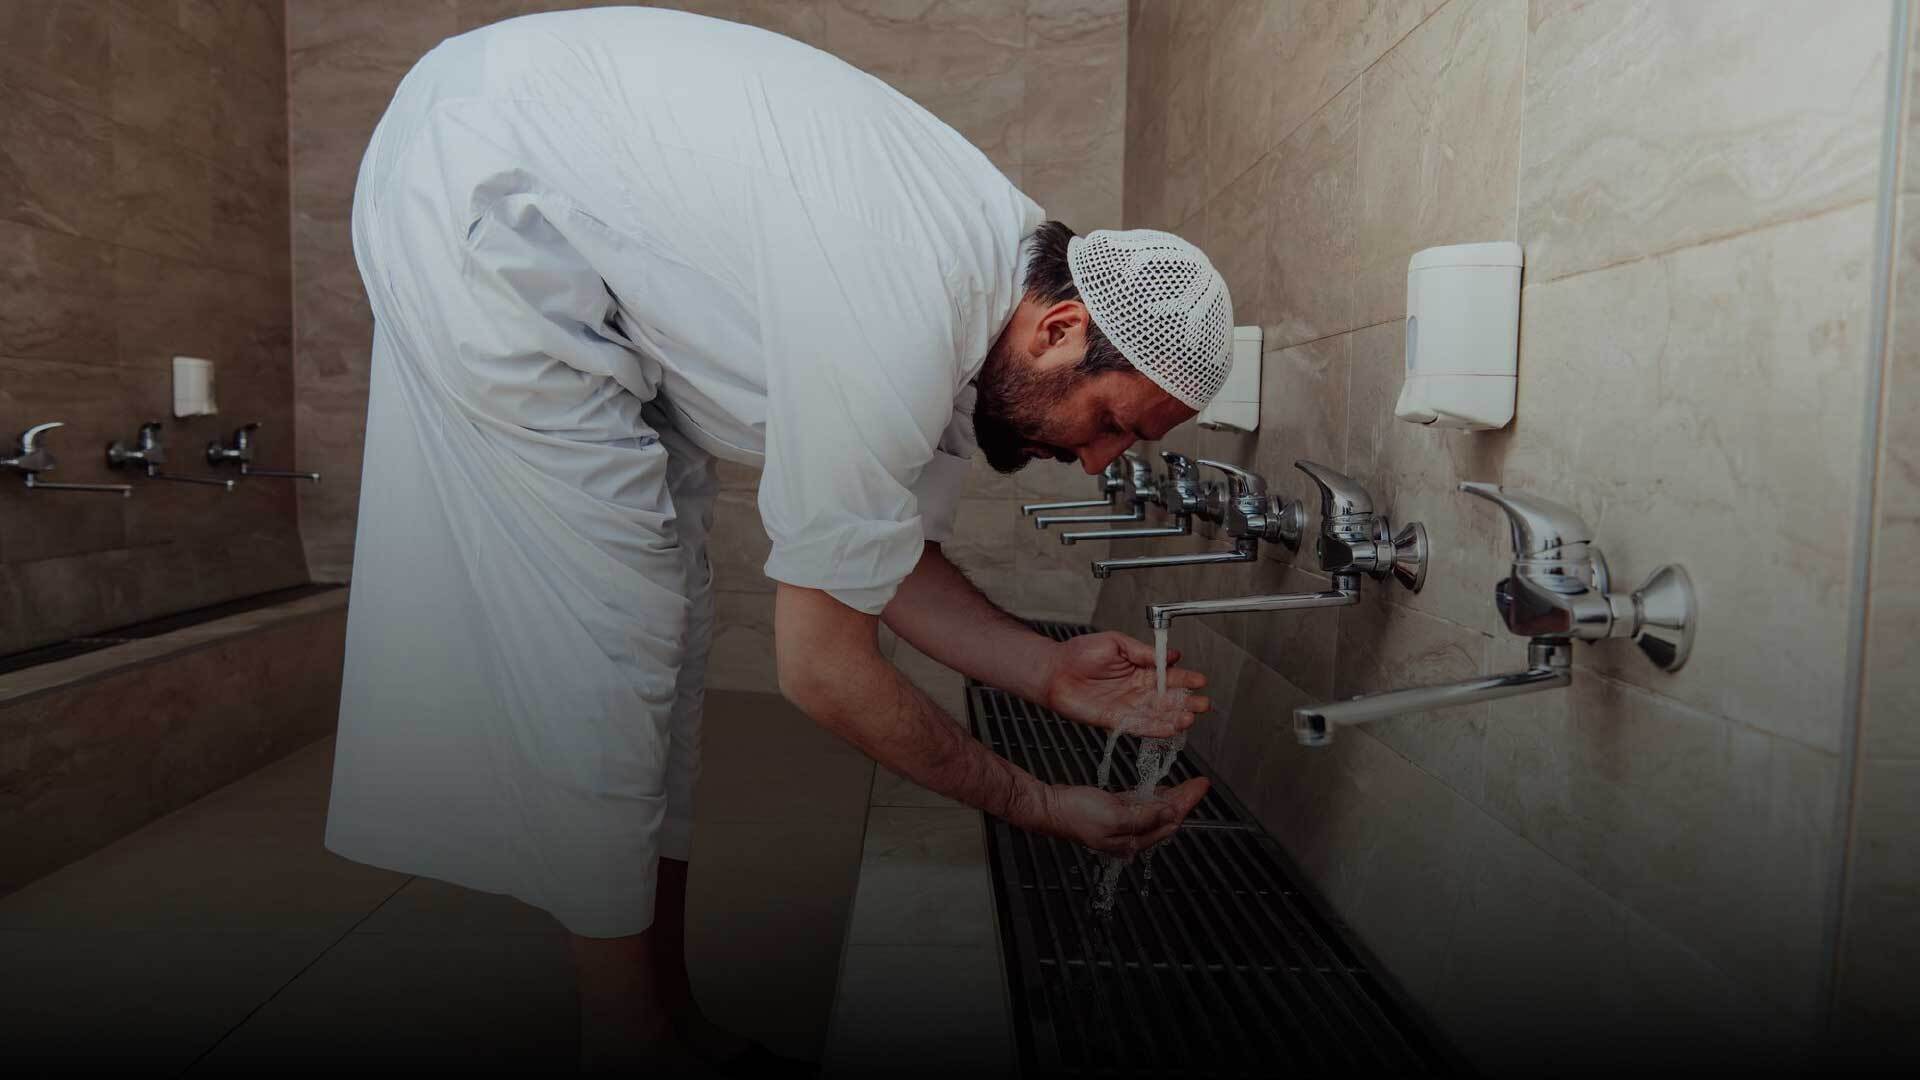 Perform Ablution, Step By Step Guide